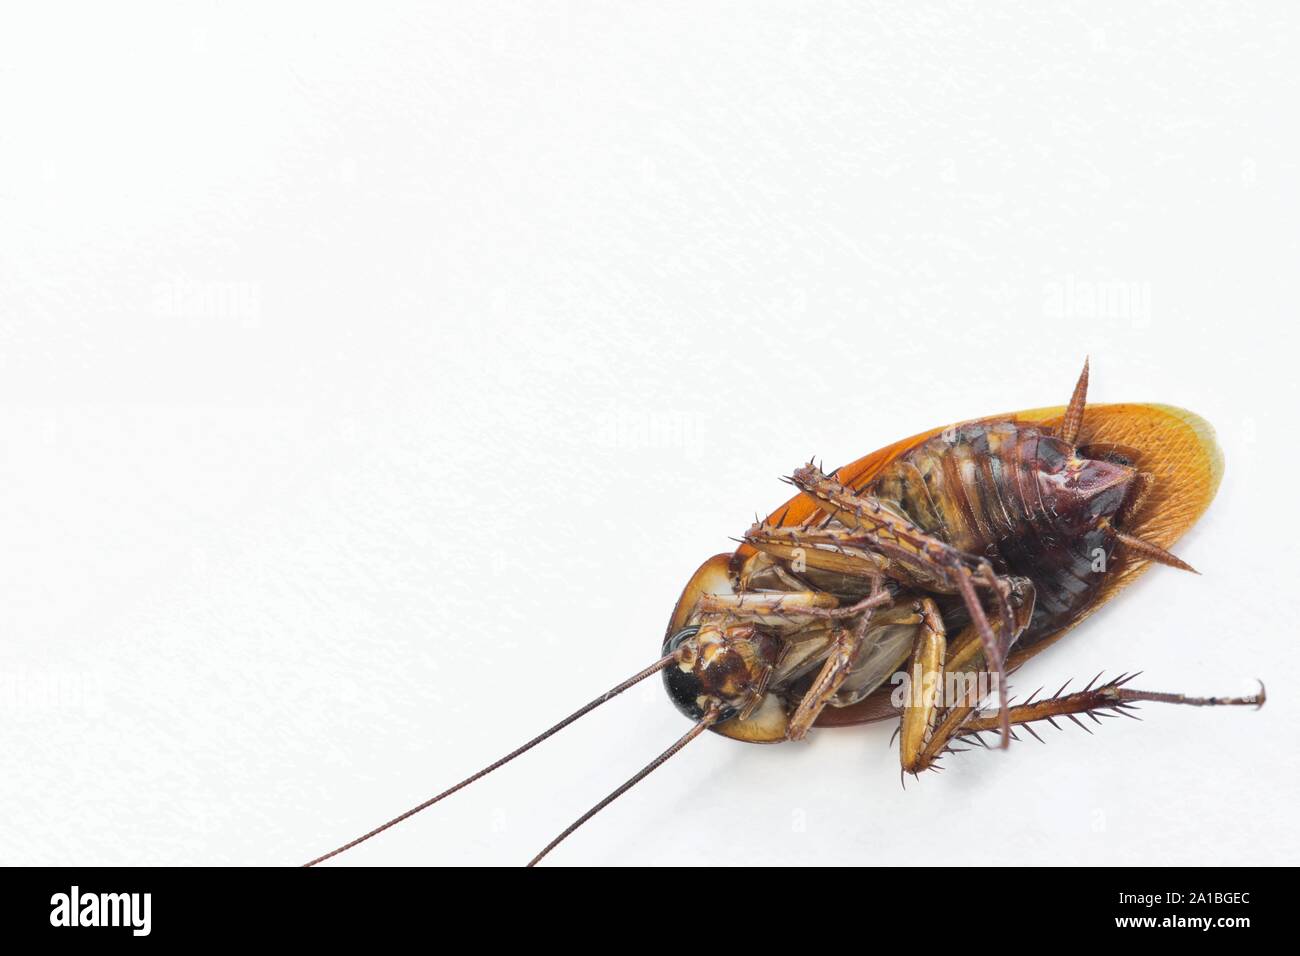 An American Cockroach laying dead on its back in the corner of the frame, with macro details and a plain white background with room for text. Stock Photo